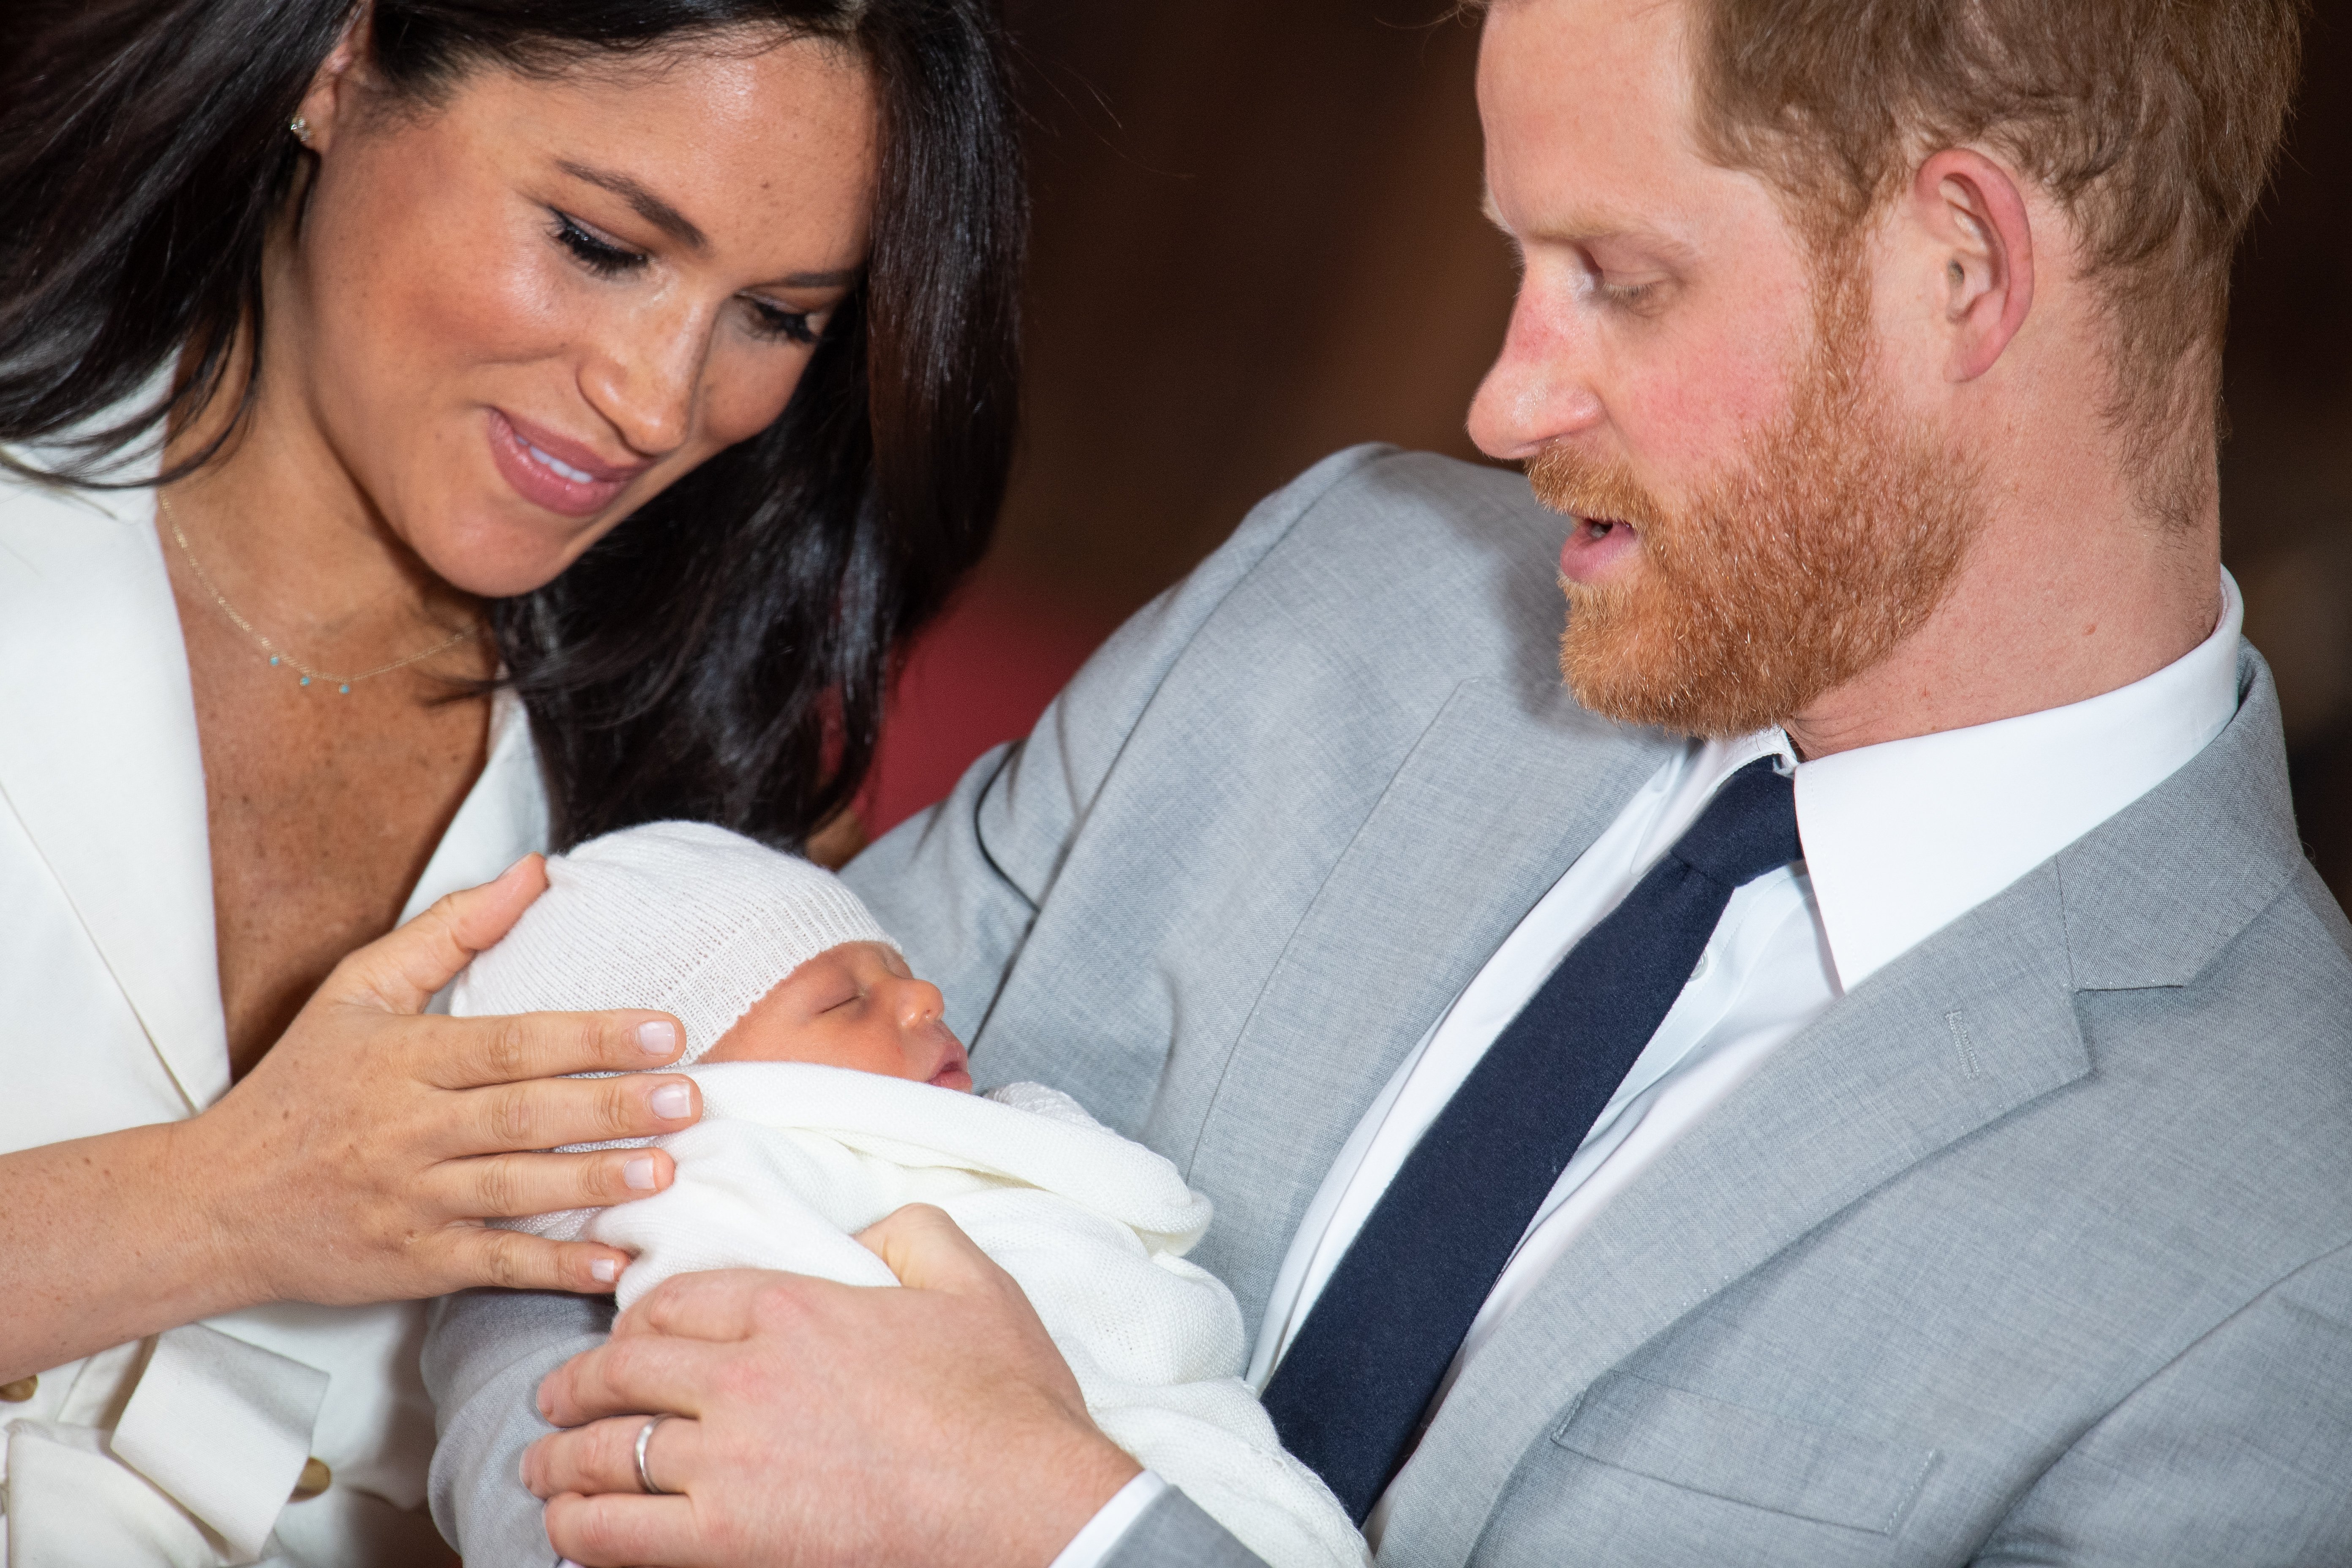 Meghan Markle and Prince Harry with their firstborn, Archie Harrison Mountbatten-Windsor. | Source: Getty Images